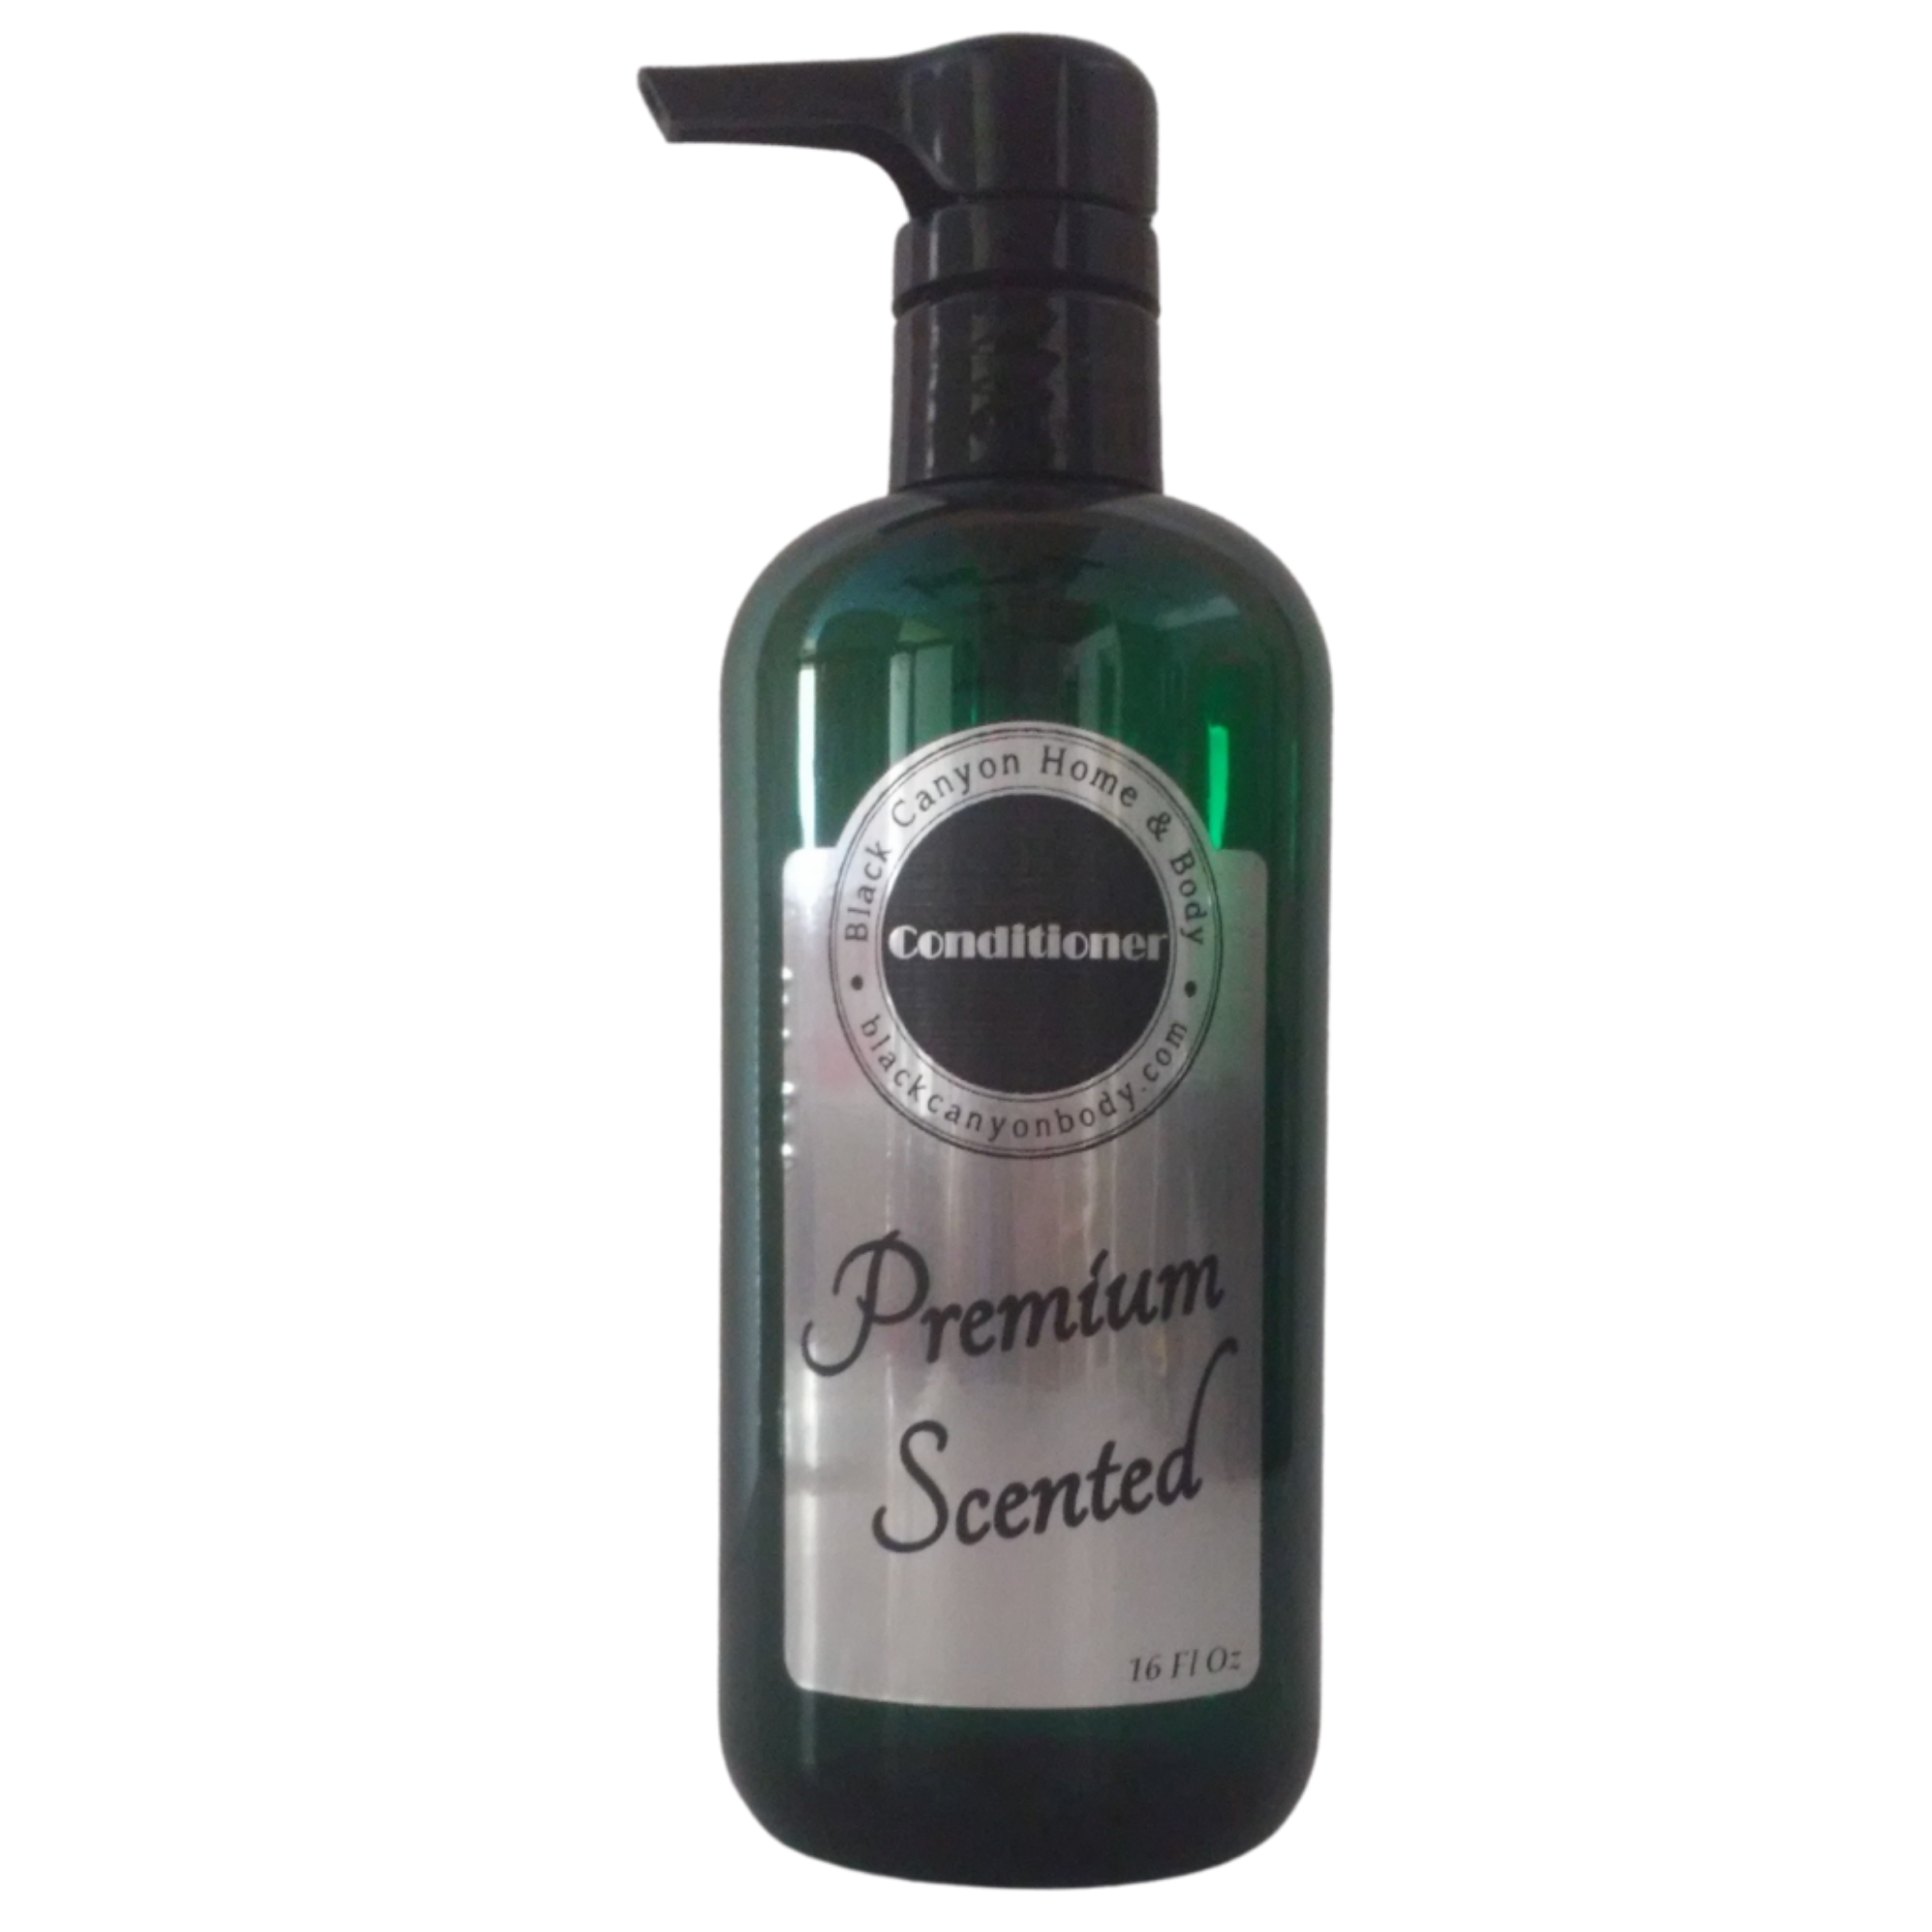 Paydens Cobalt Sapphire Pools Scented Conditioner with Argan Oil For Men